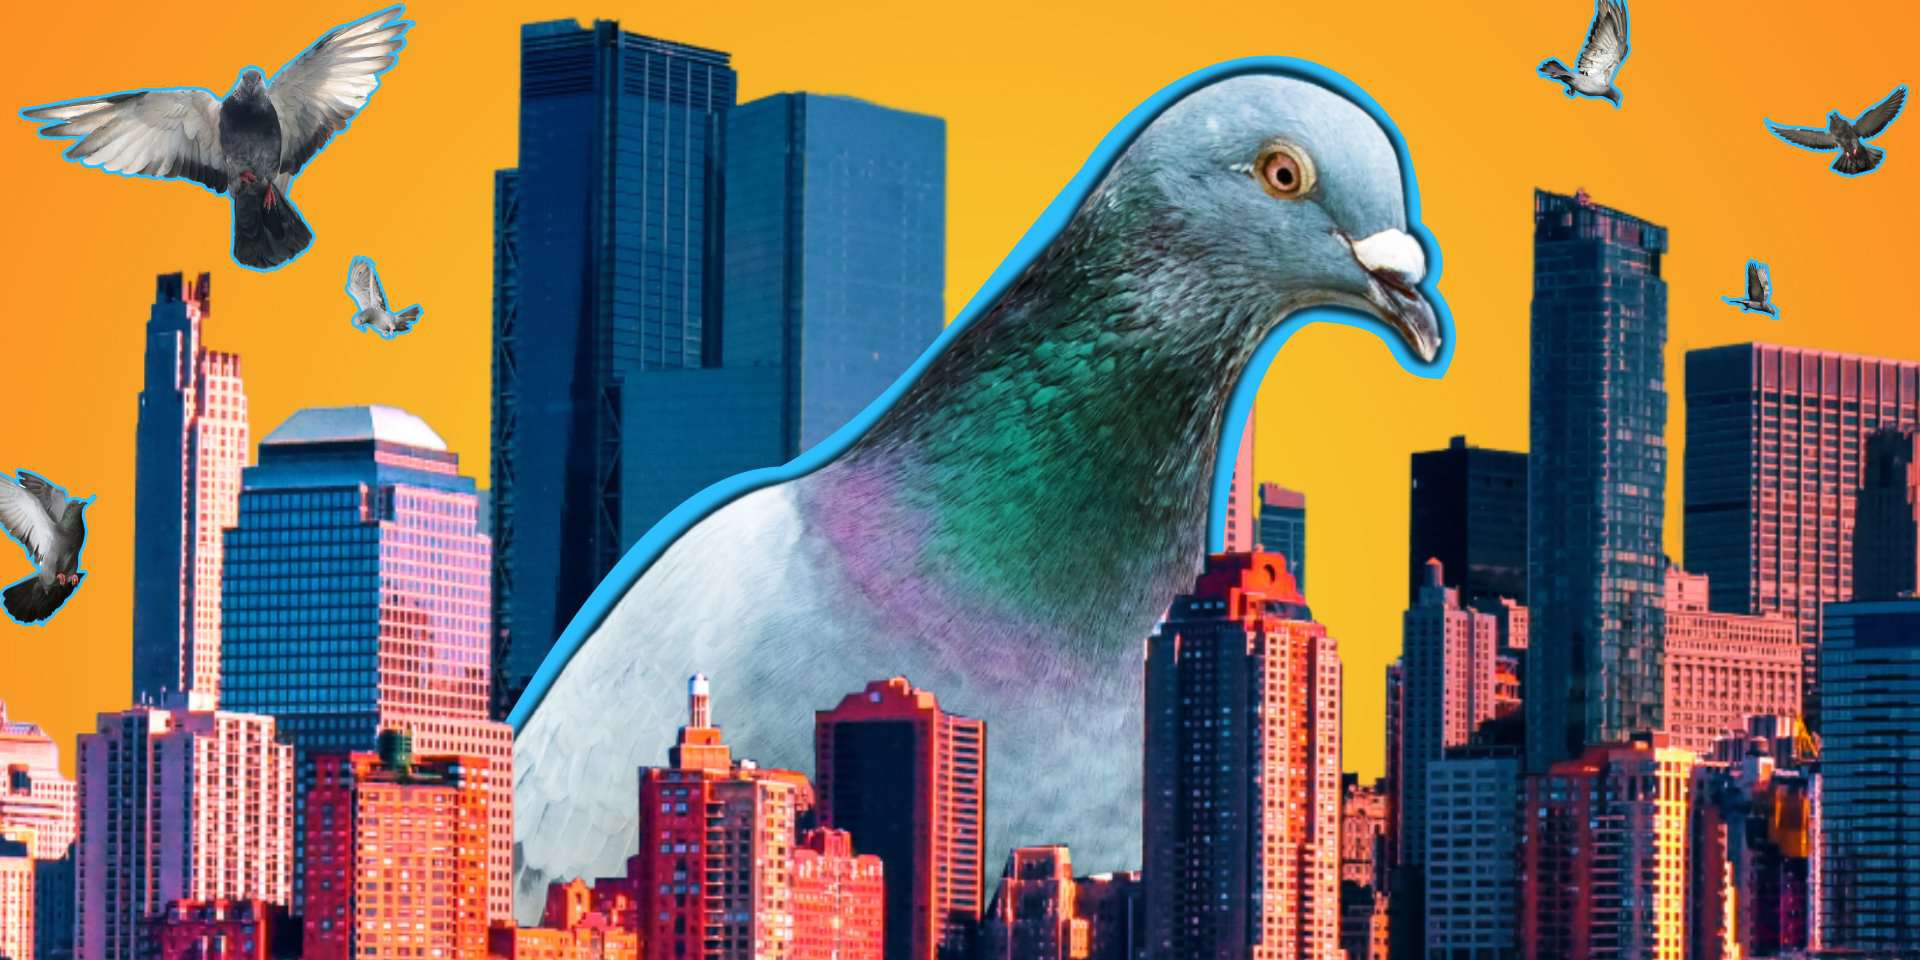 Taboola Ad Example 53888 - Here's Why American Cities Have So Many Pigeons